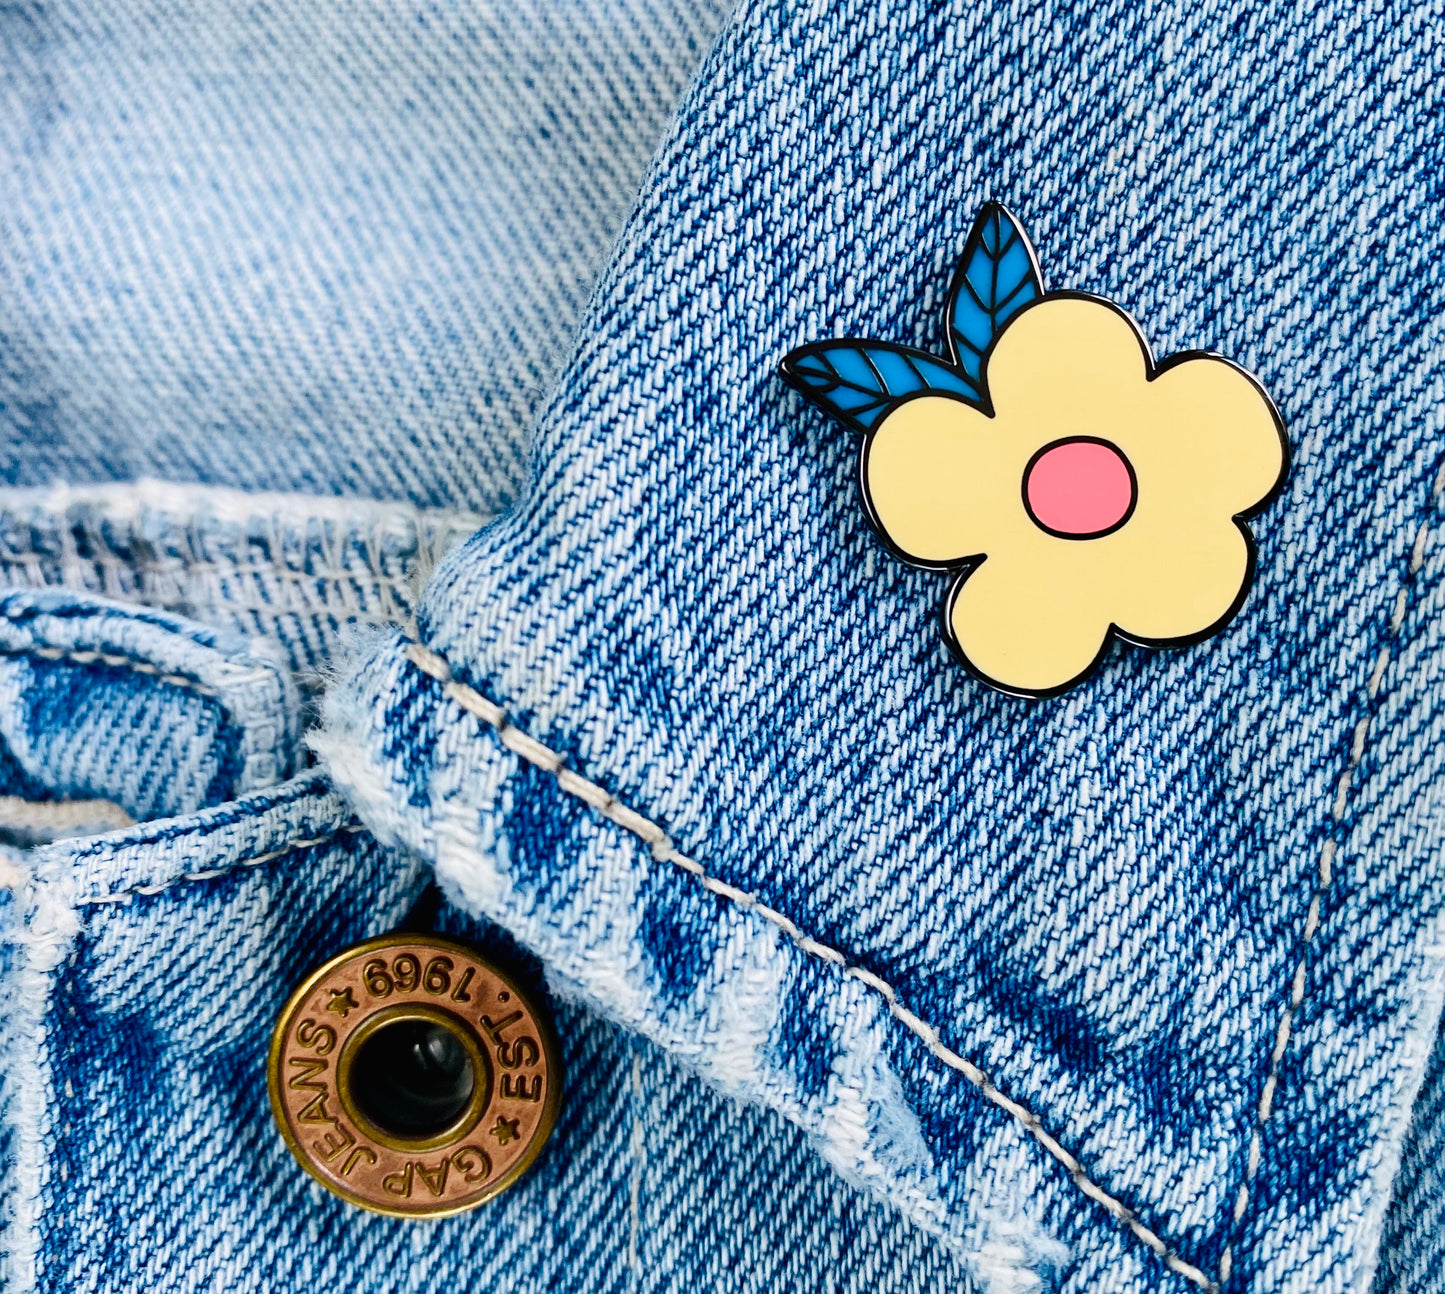 Pretty Retro Flower Hard Enamel Pin Badge - Such a Lovely Gift Idea. Here the Pretty Badge is Pinned to my Denim Jacket Collar!